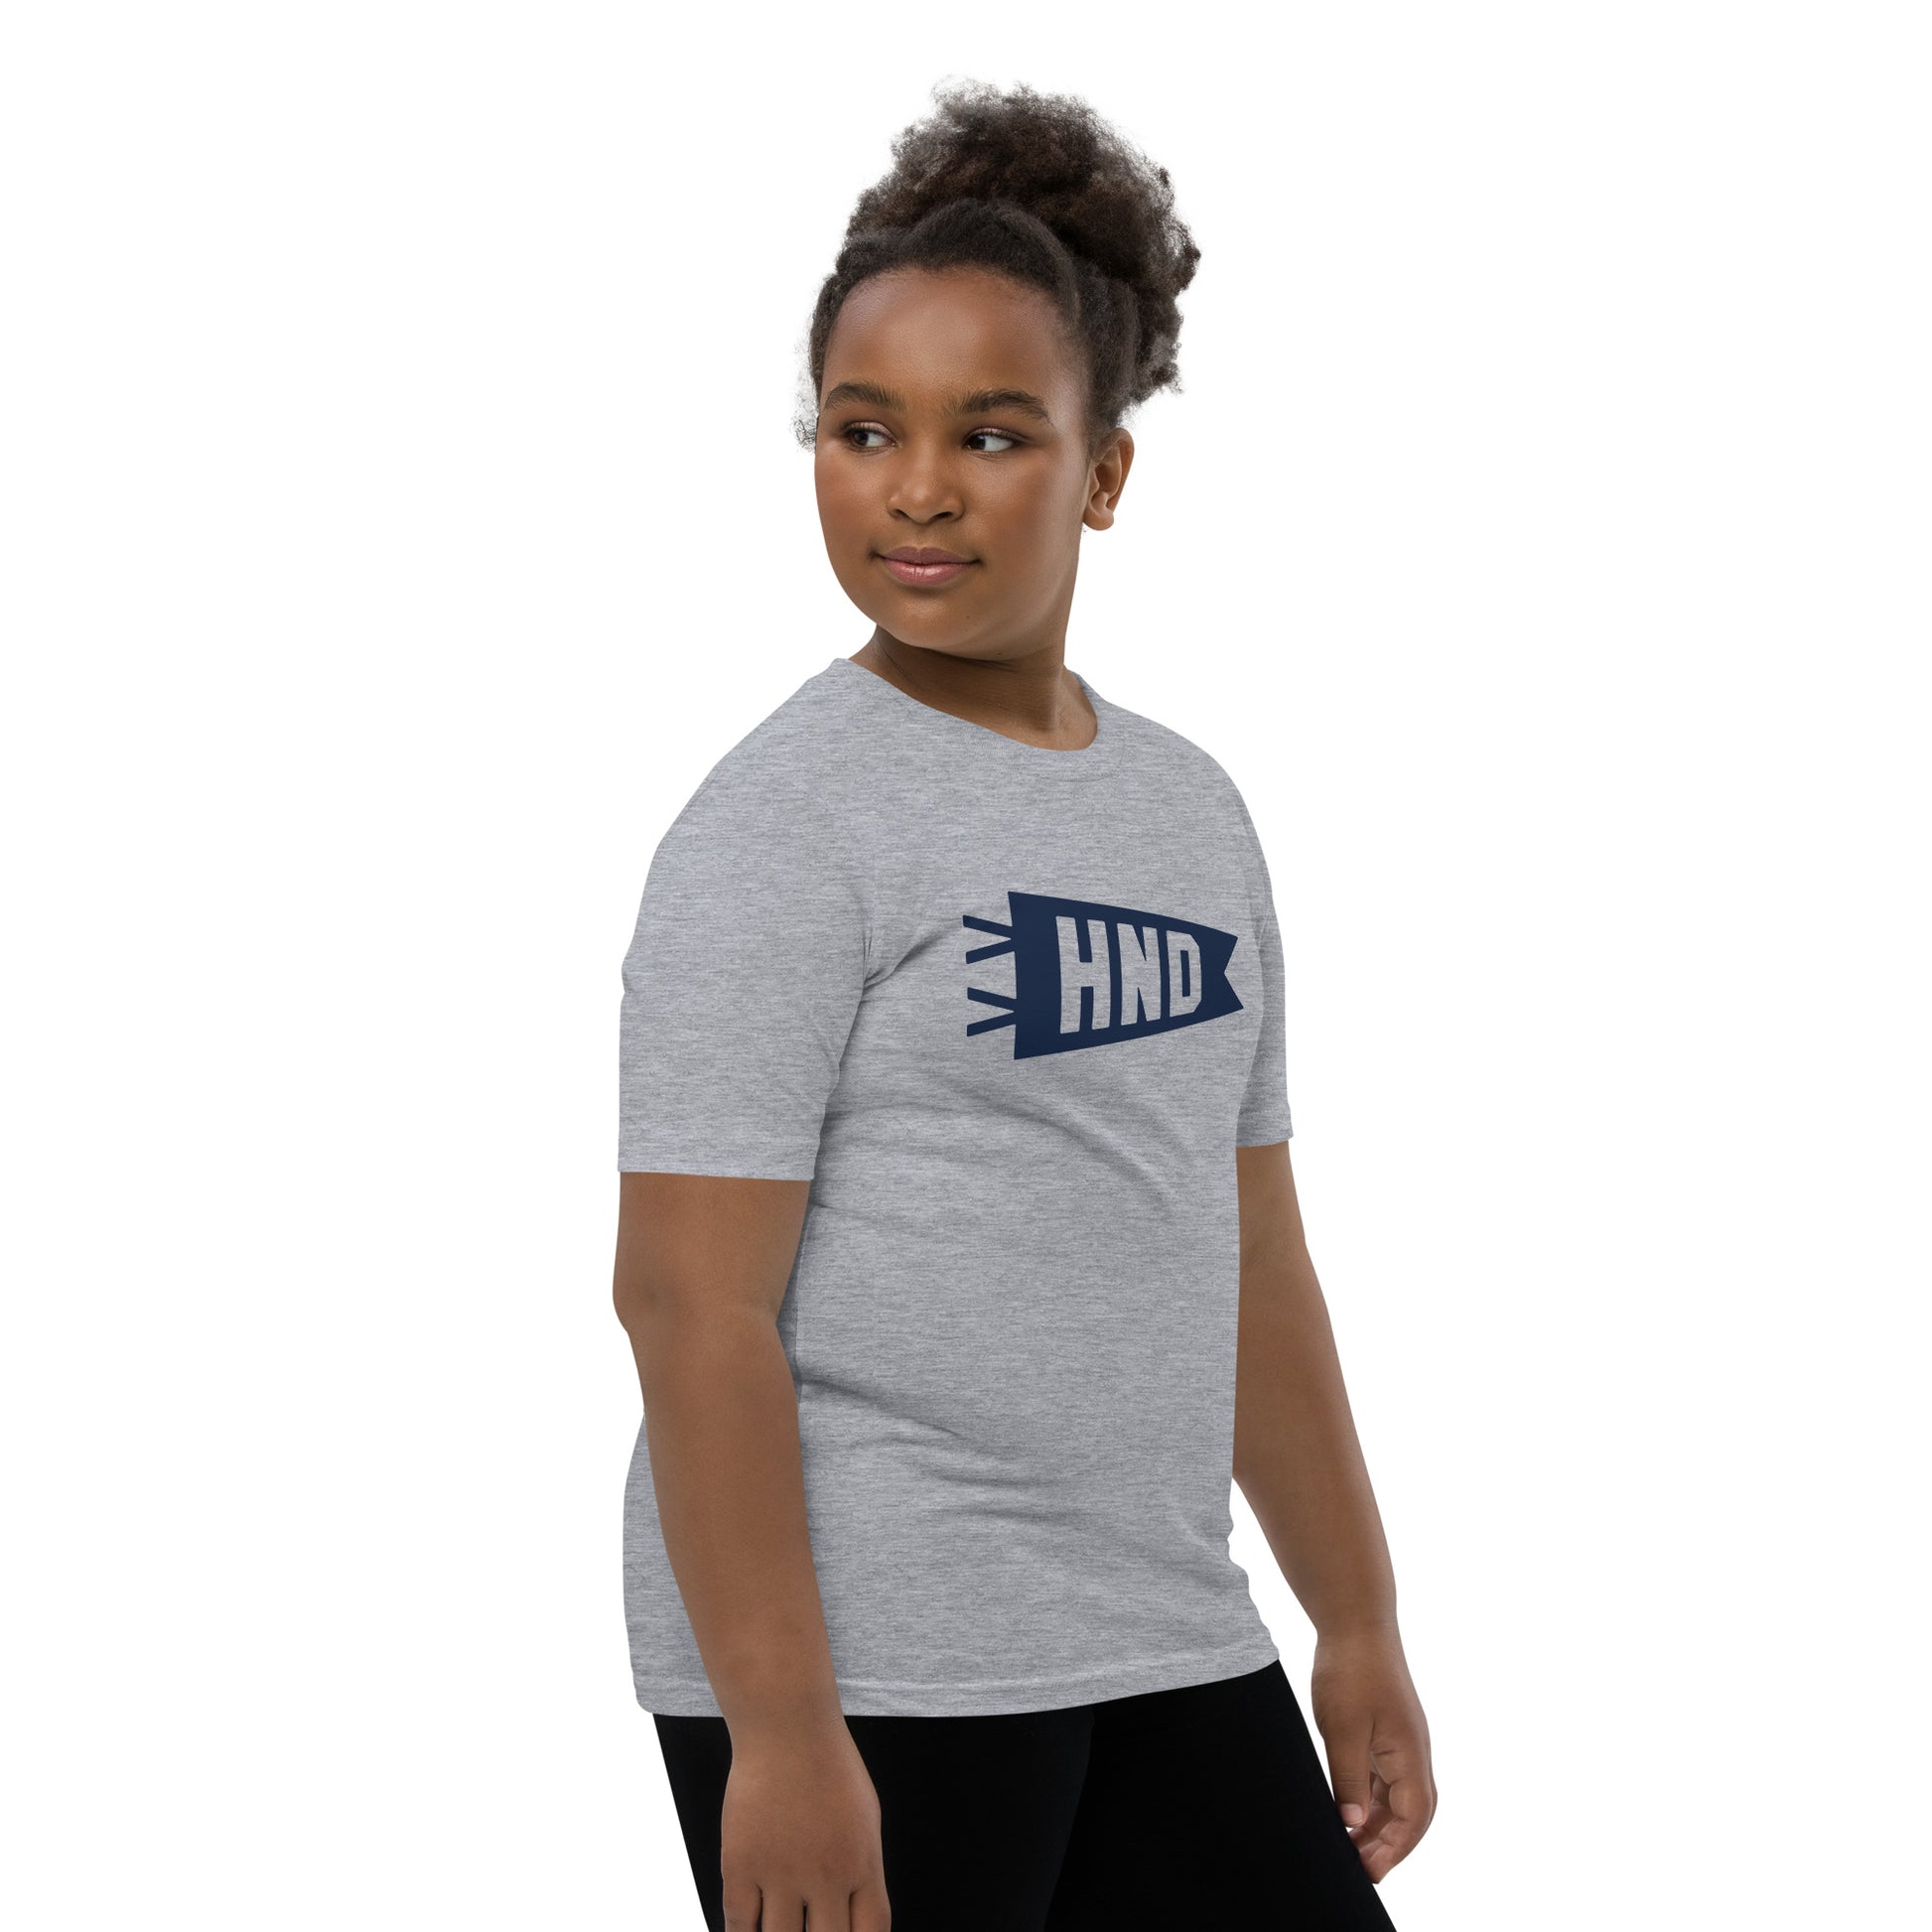 Kid's Airport Code Tee - Navy Blue Graphic • HND Tokyo • YHM Designs - Image 03